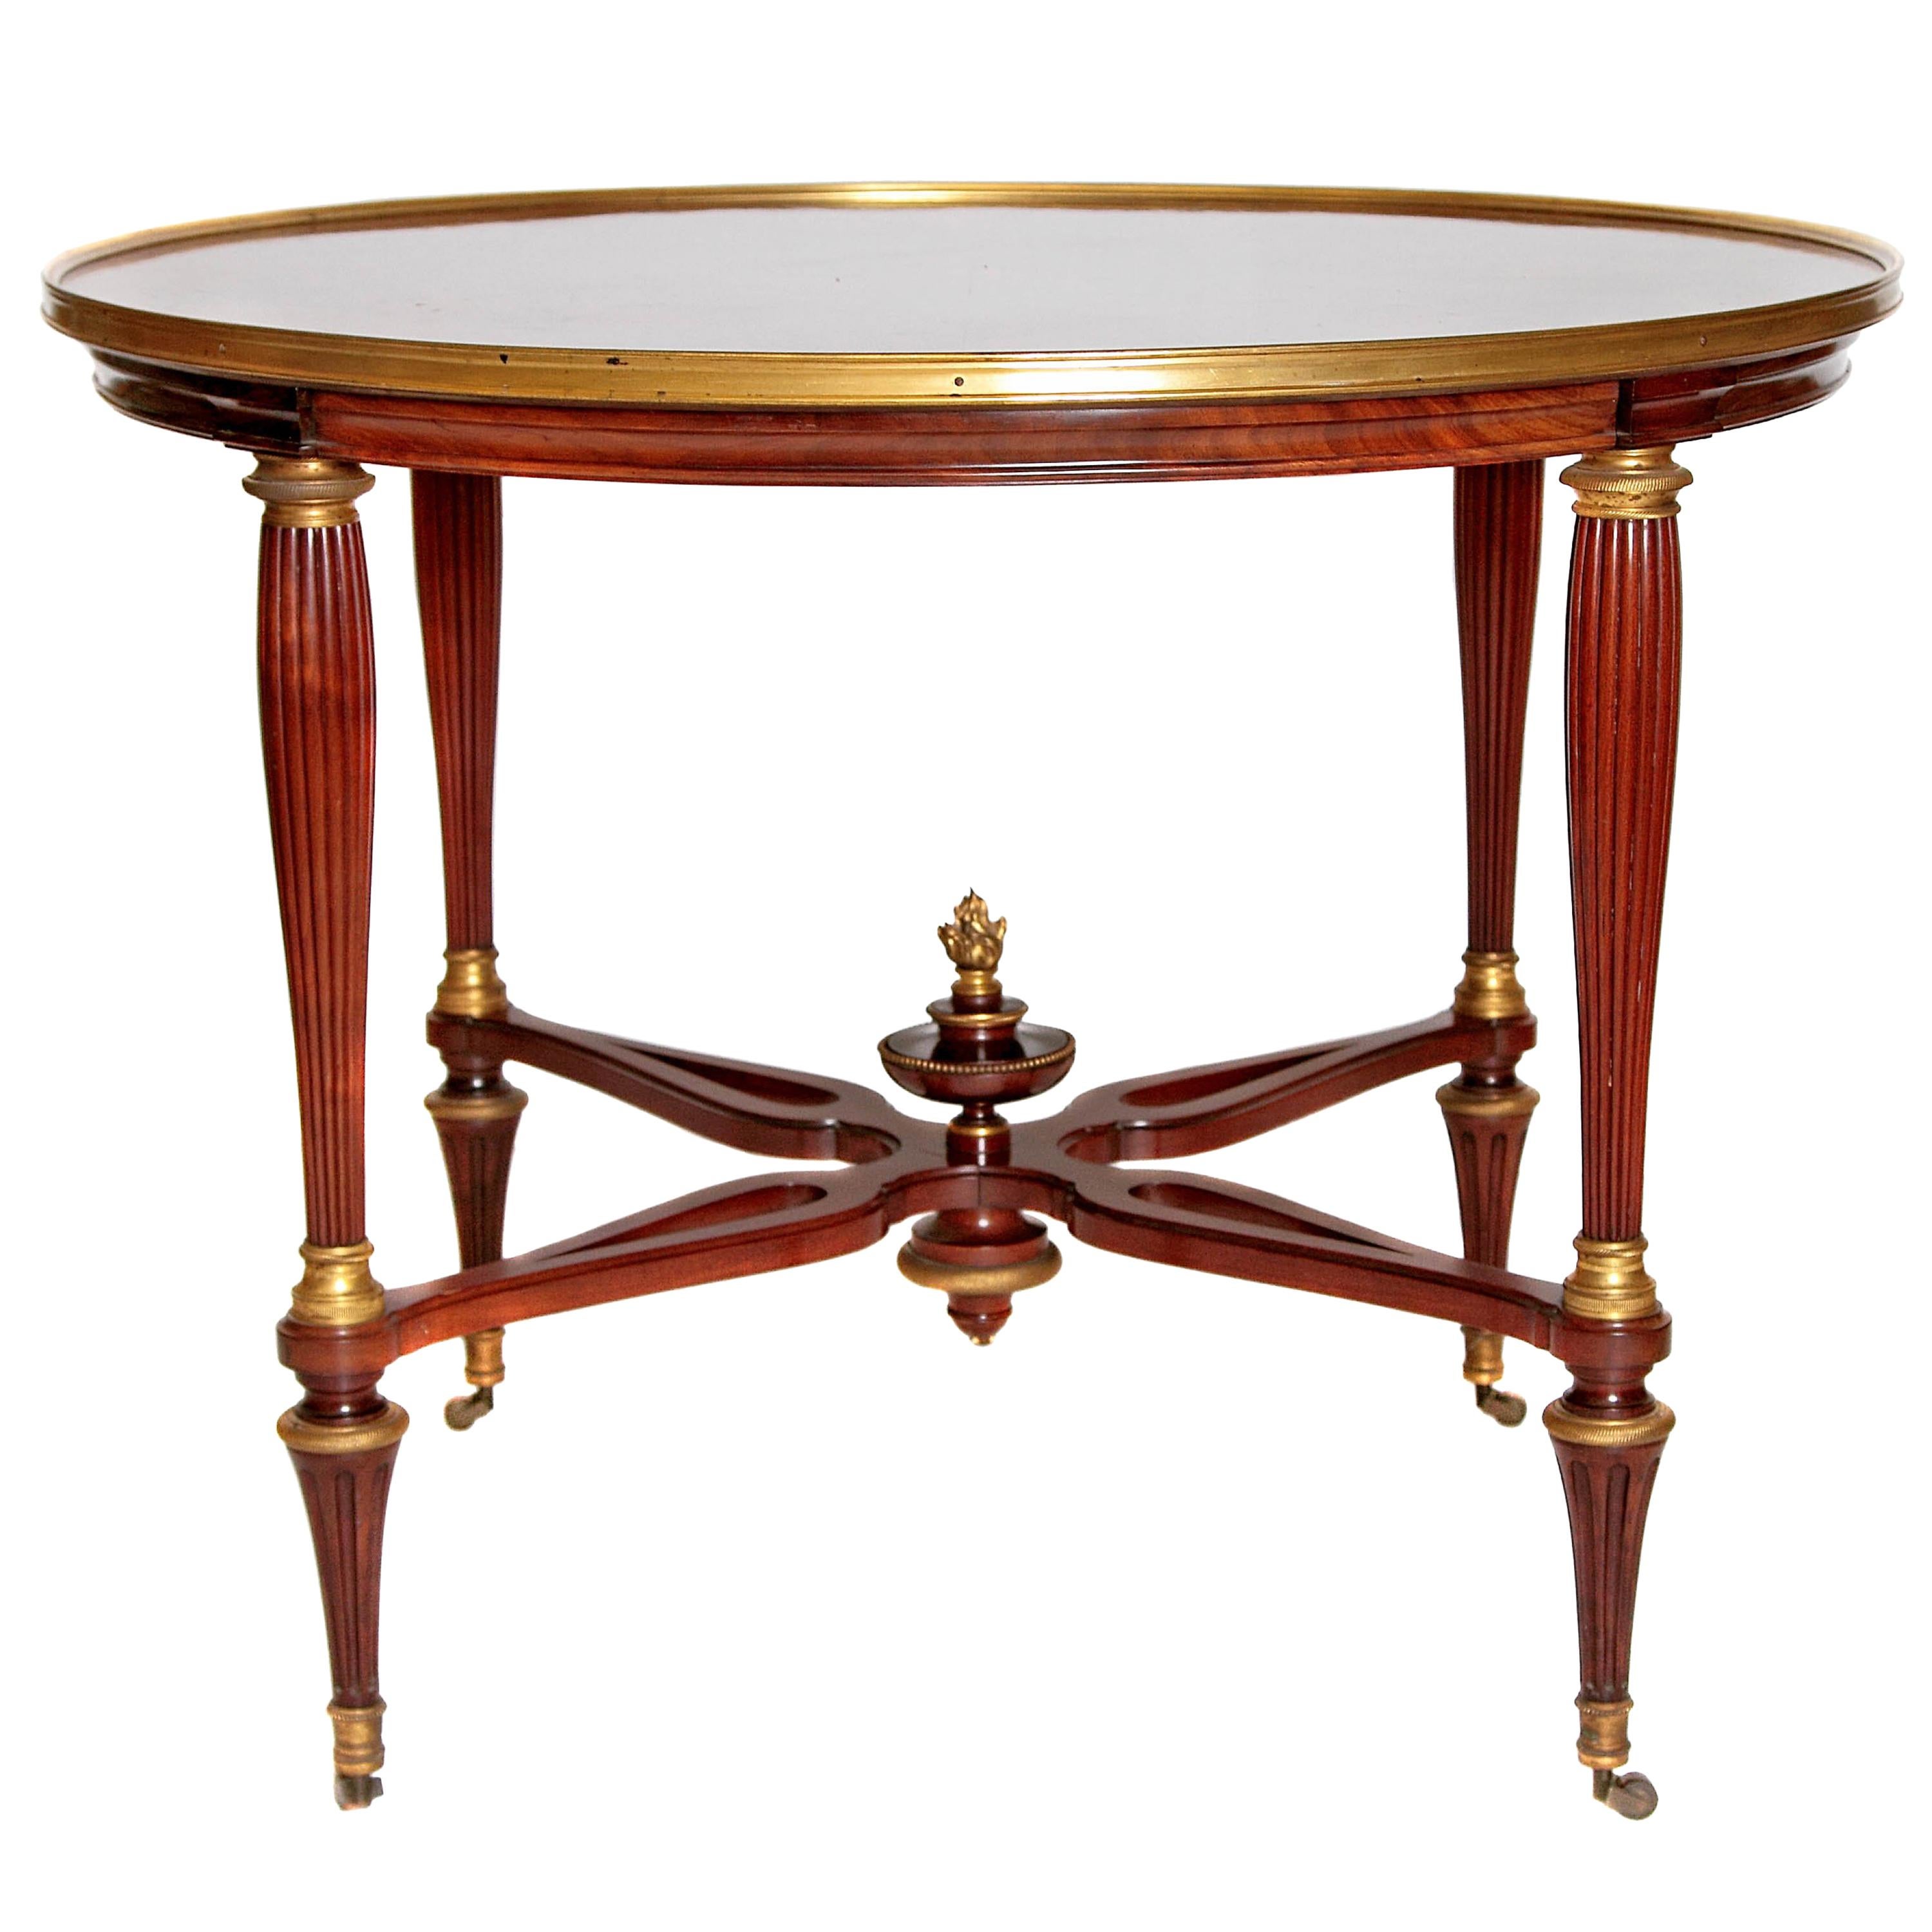 19th Century Russian Neoclassical Centre Table with Burled Walnut Top